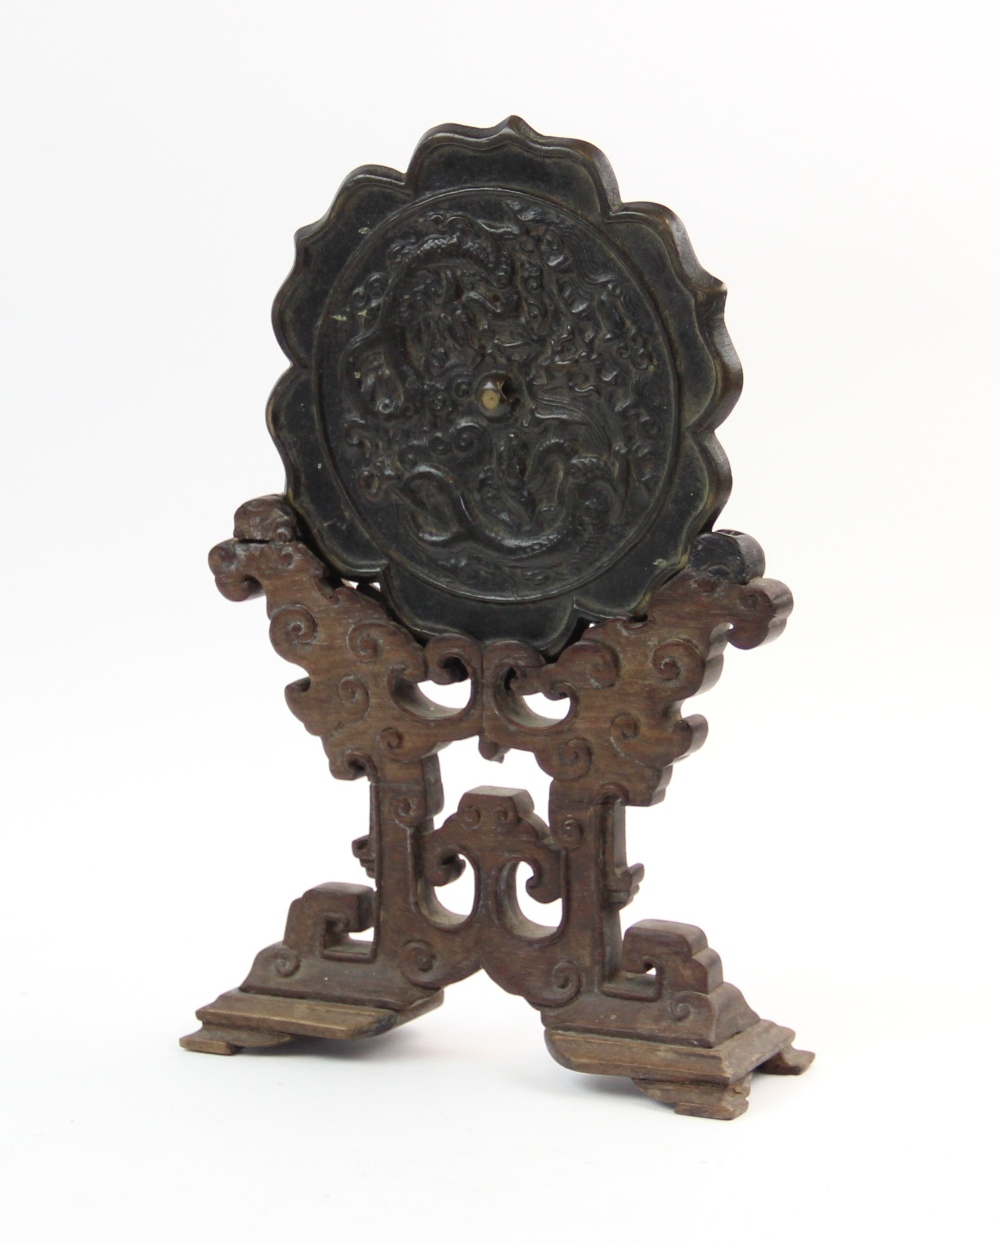 A Chinese bronze hexafoil lotus mirror, Ming dynasty, cast in relief with two confronting dragon - Image 2 of 2